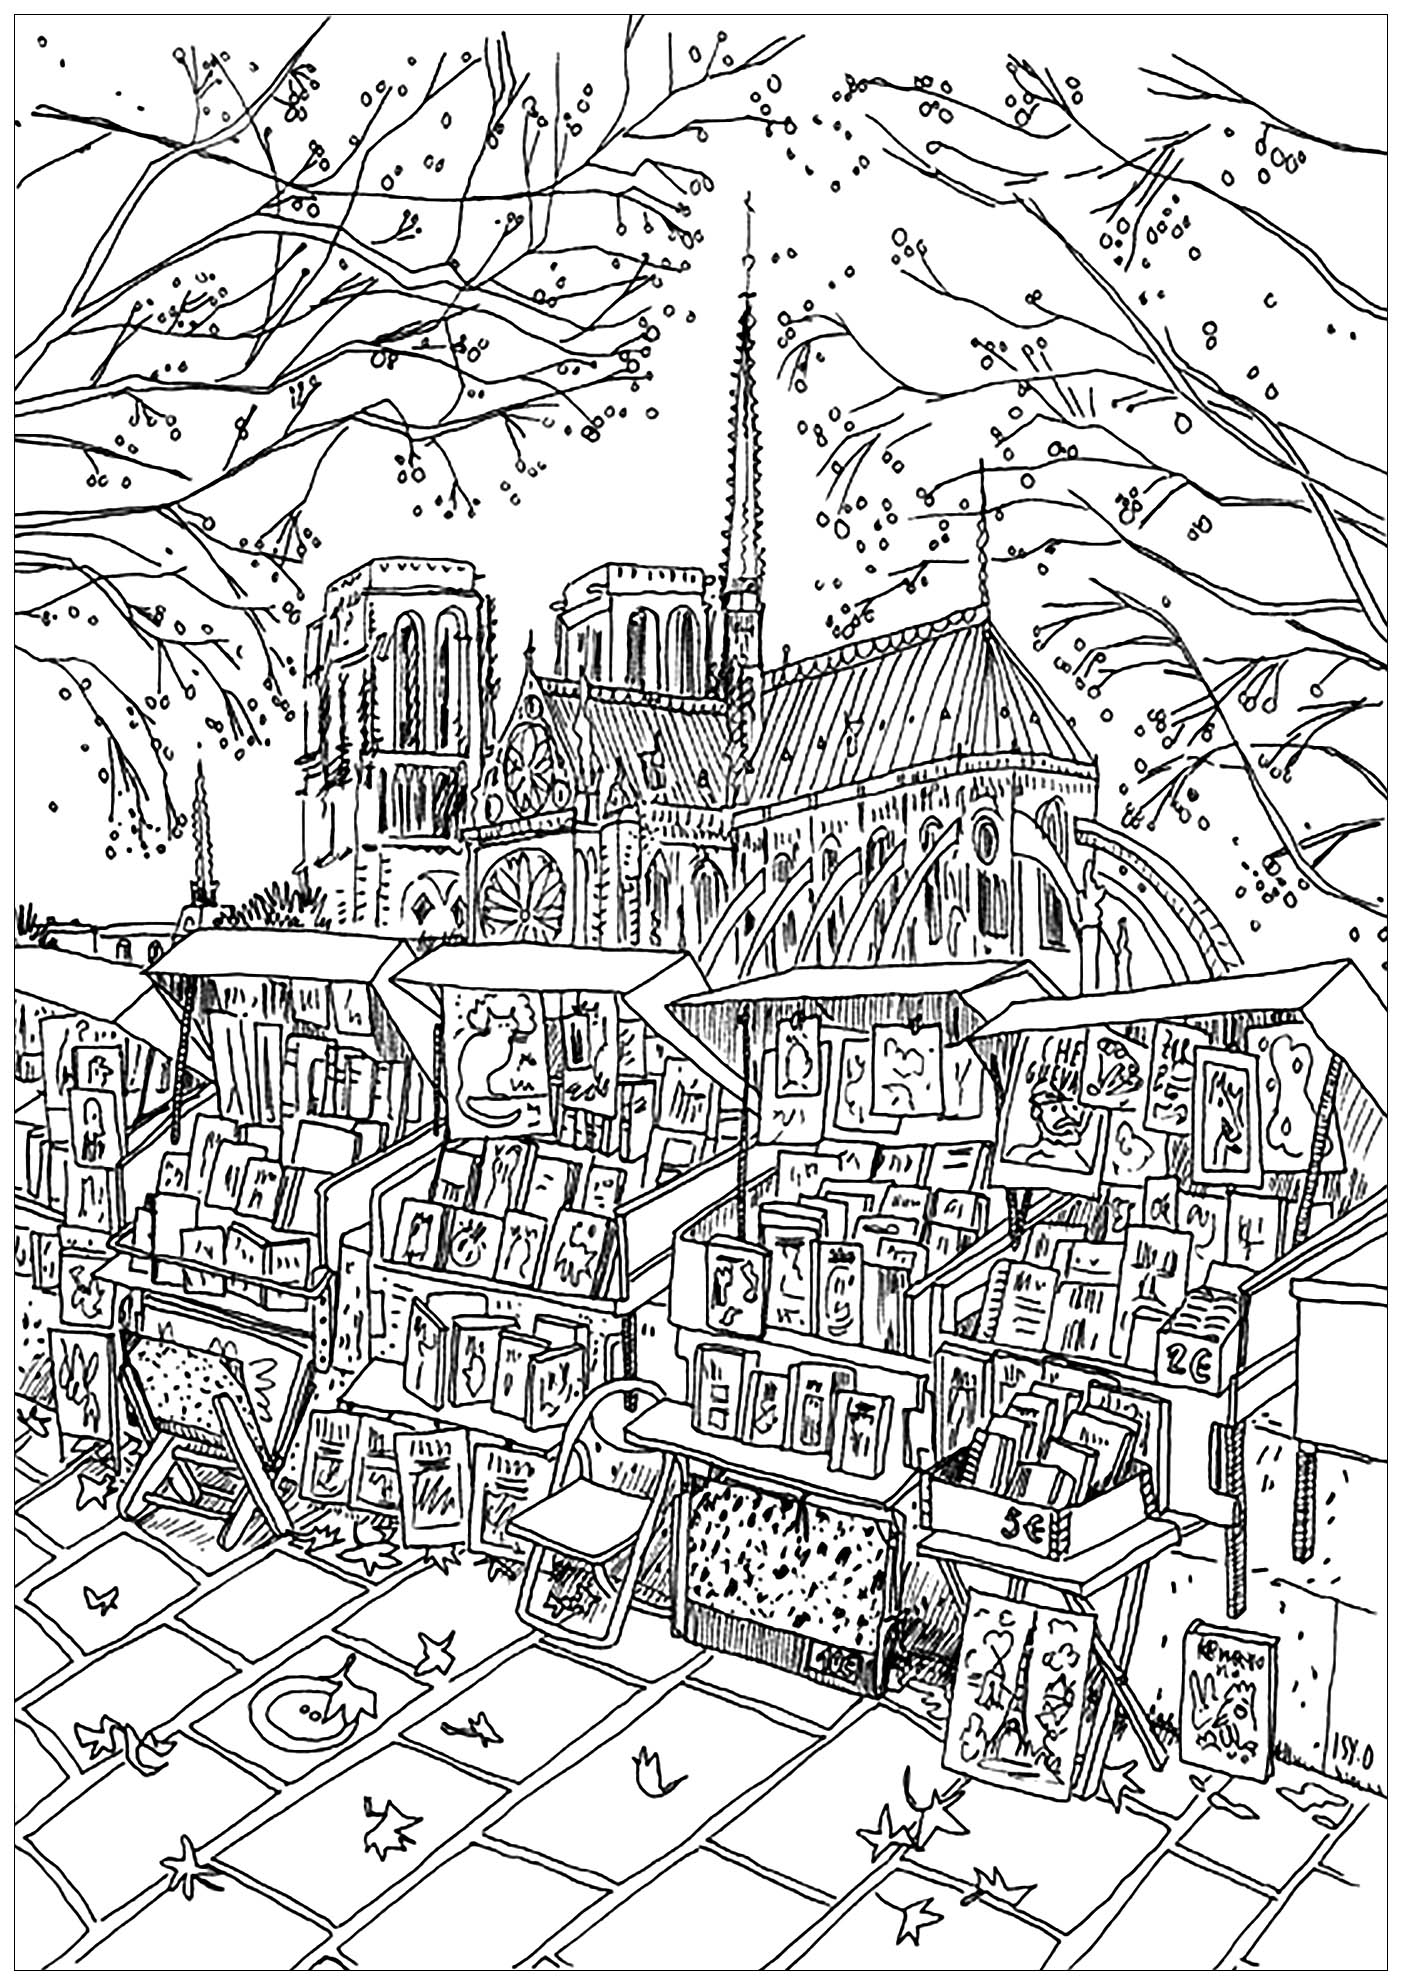 Notre Dame de Paris drawing, with little bookstore in foreground